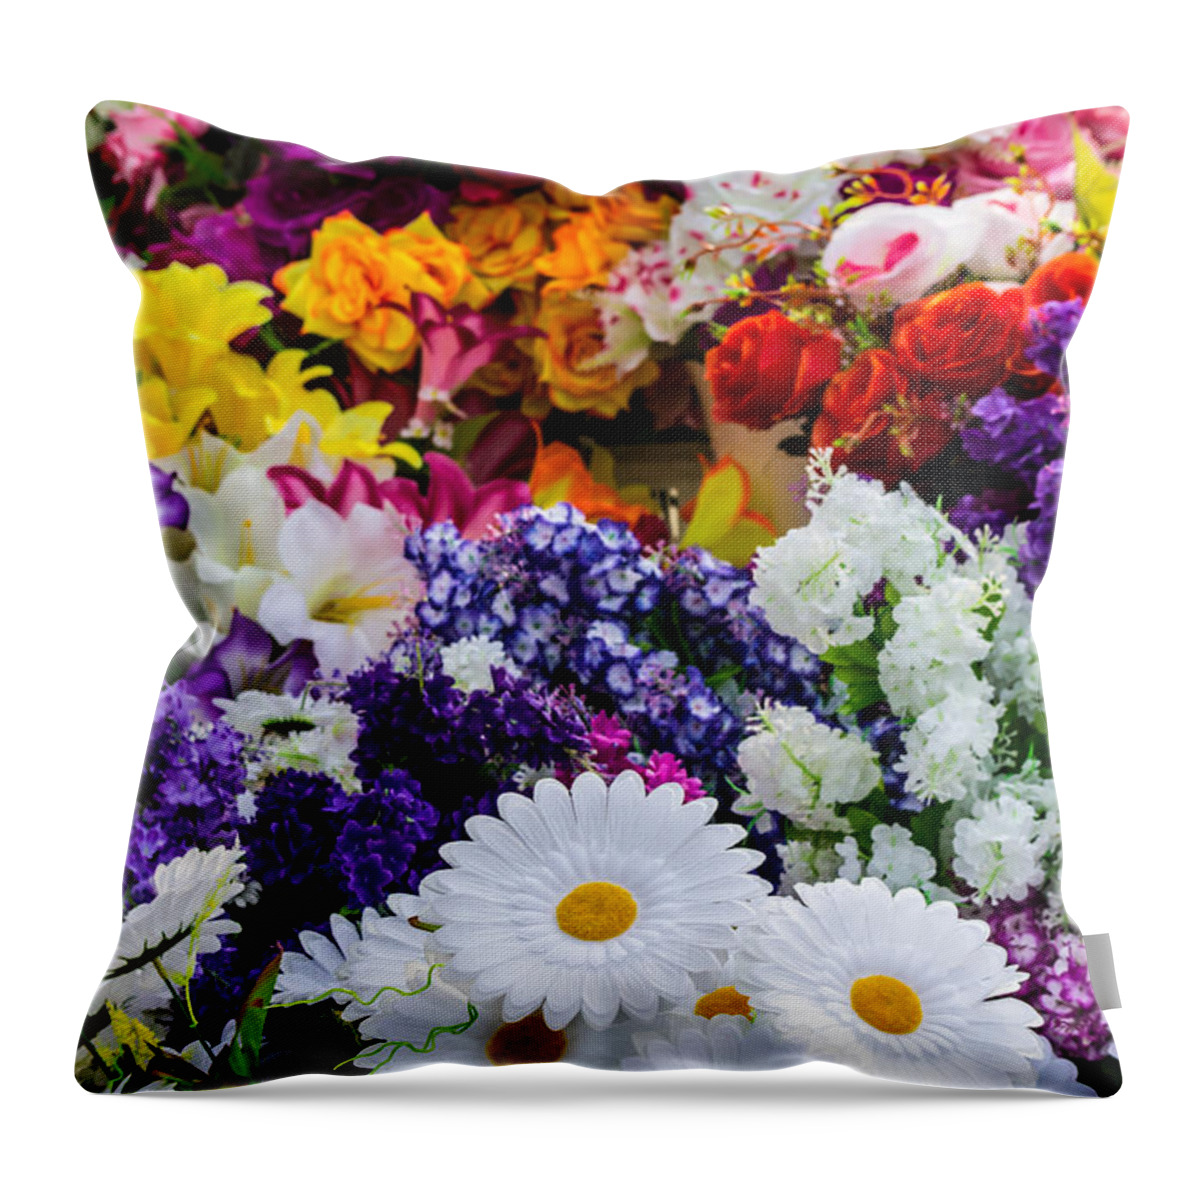 Arrangement Throw Pillow featuring the photograph Fake Plastic Flowers by John Williams